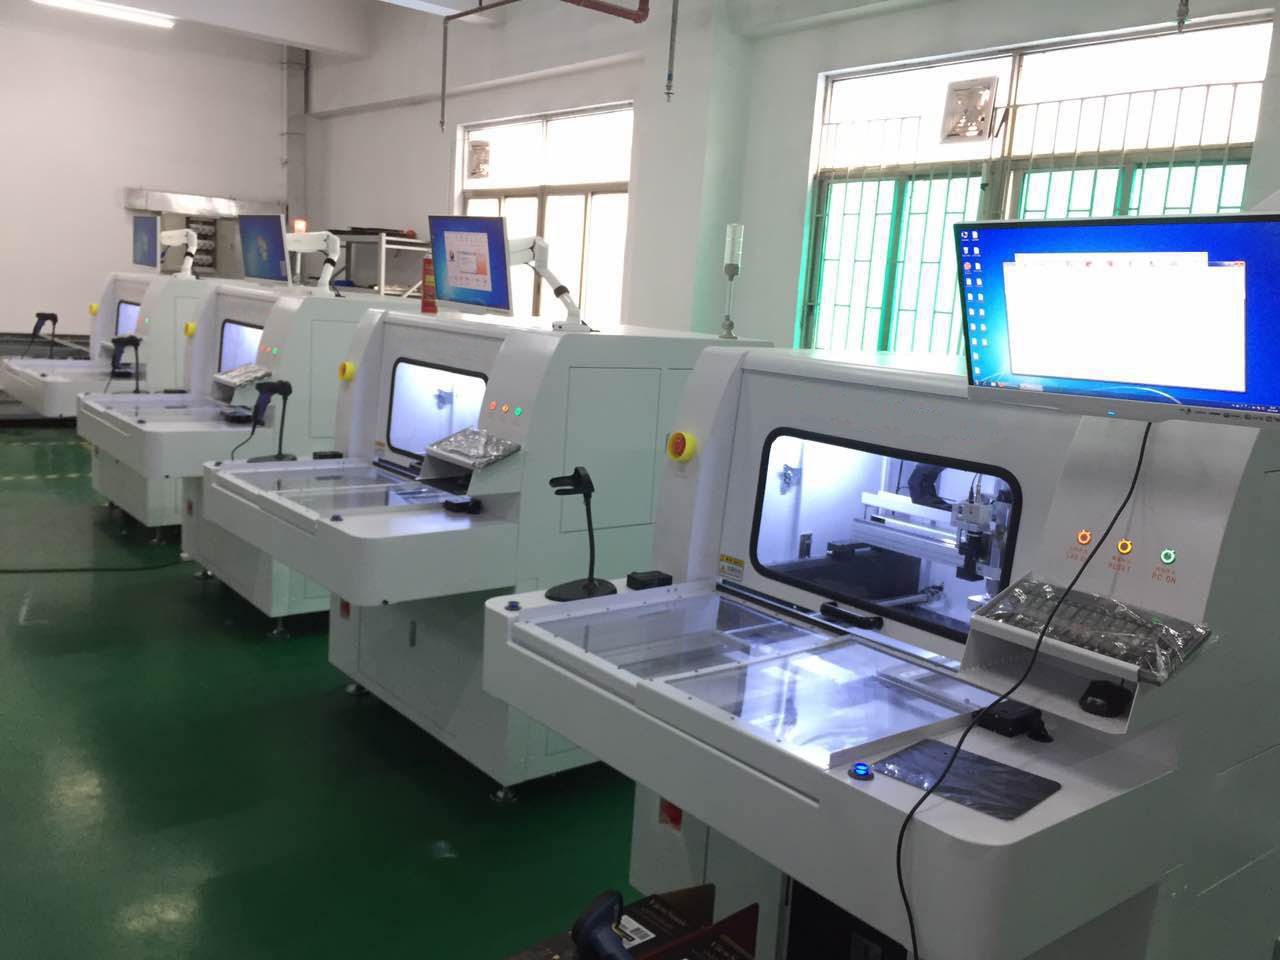 Functions of programmable PCB depaneling router machine